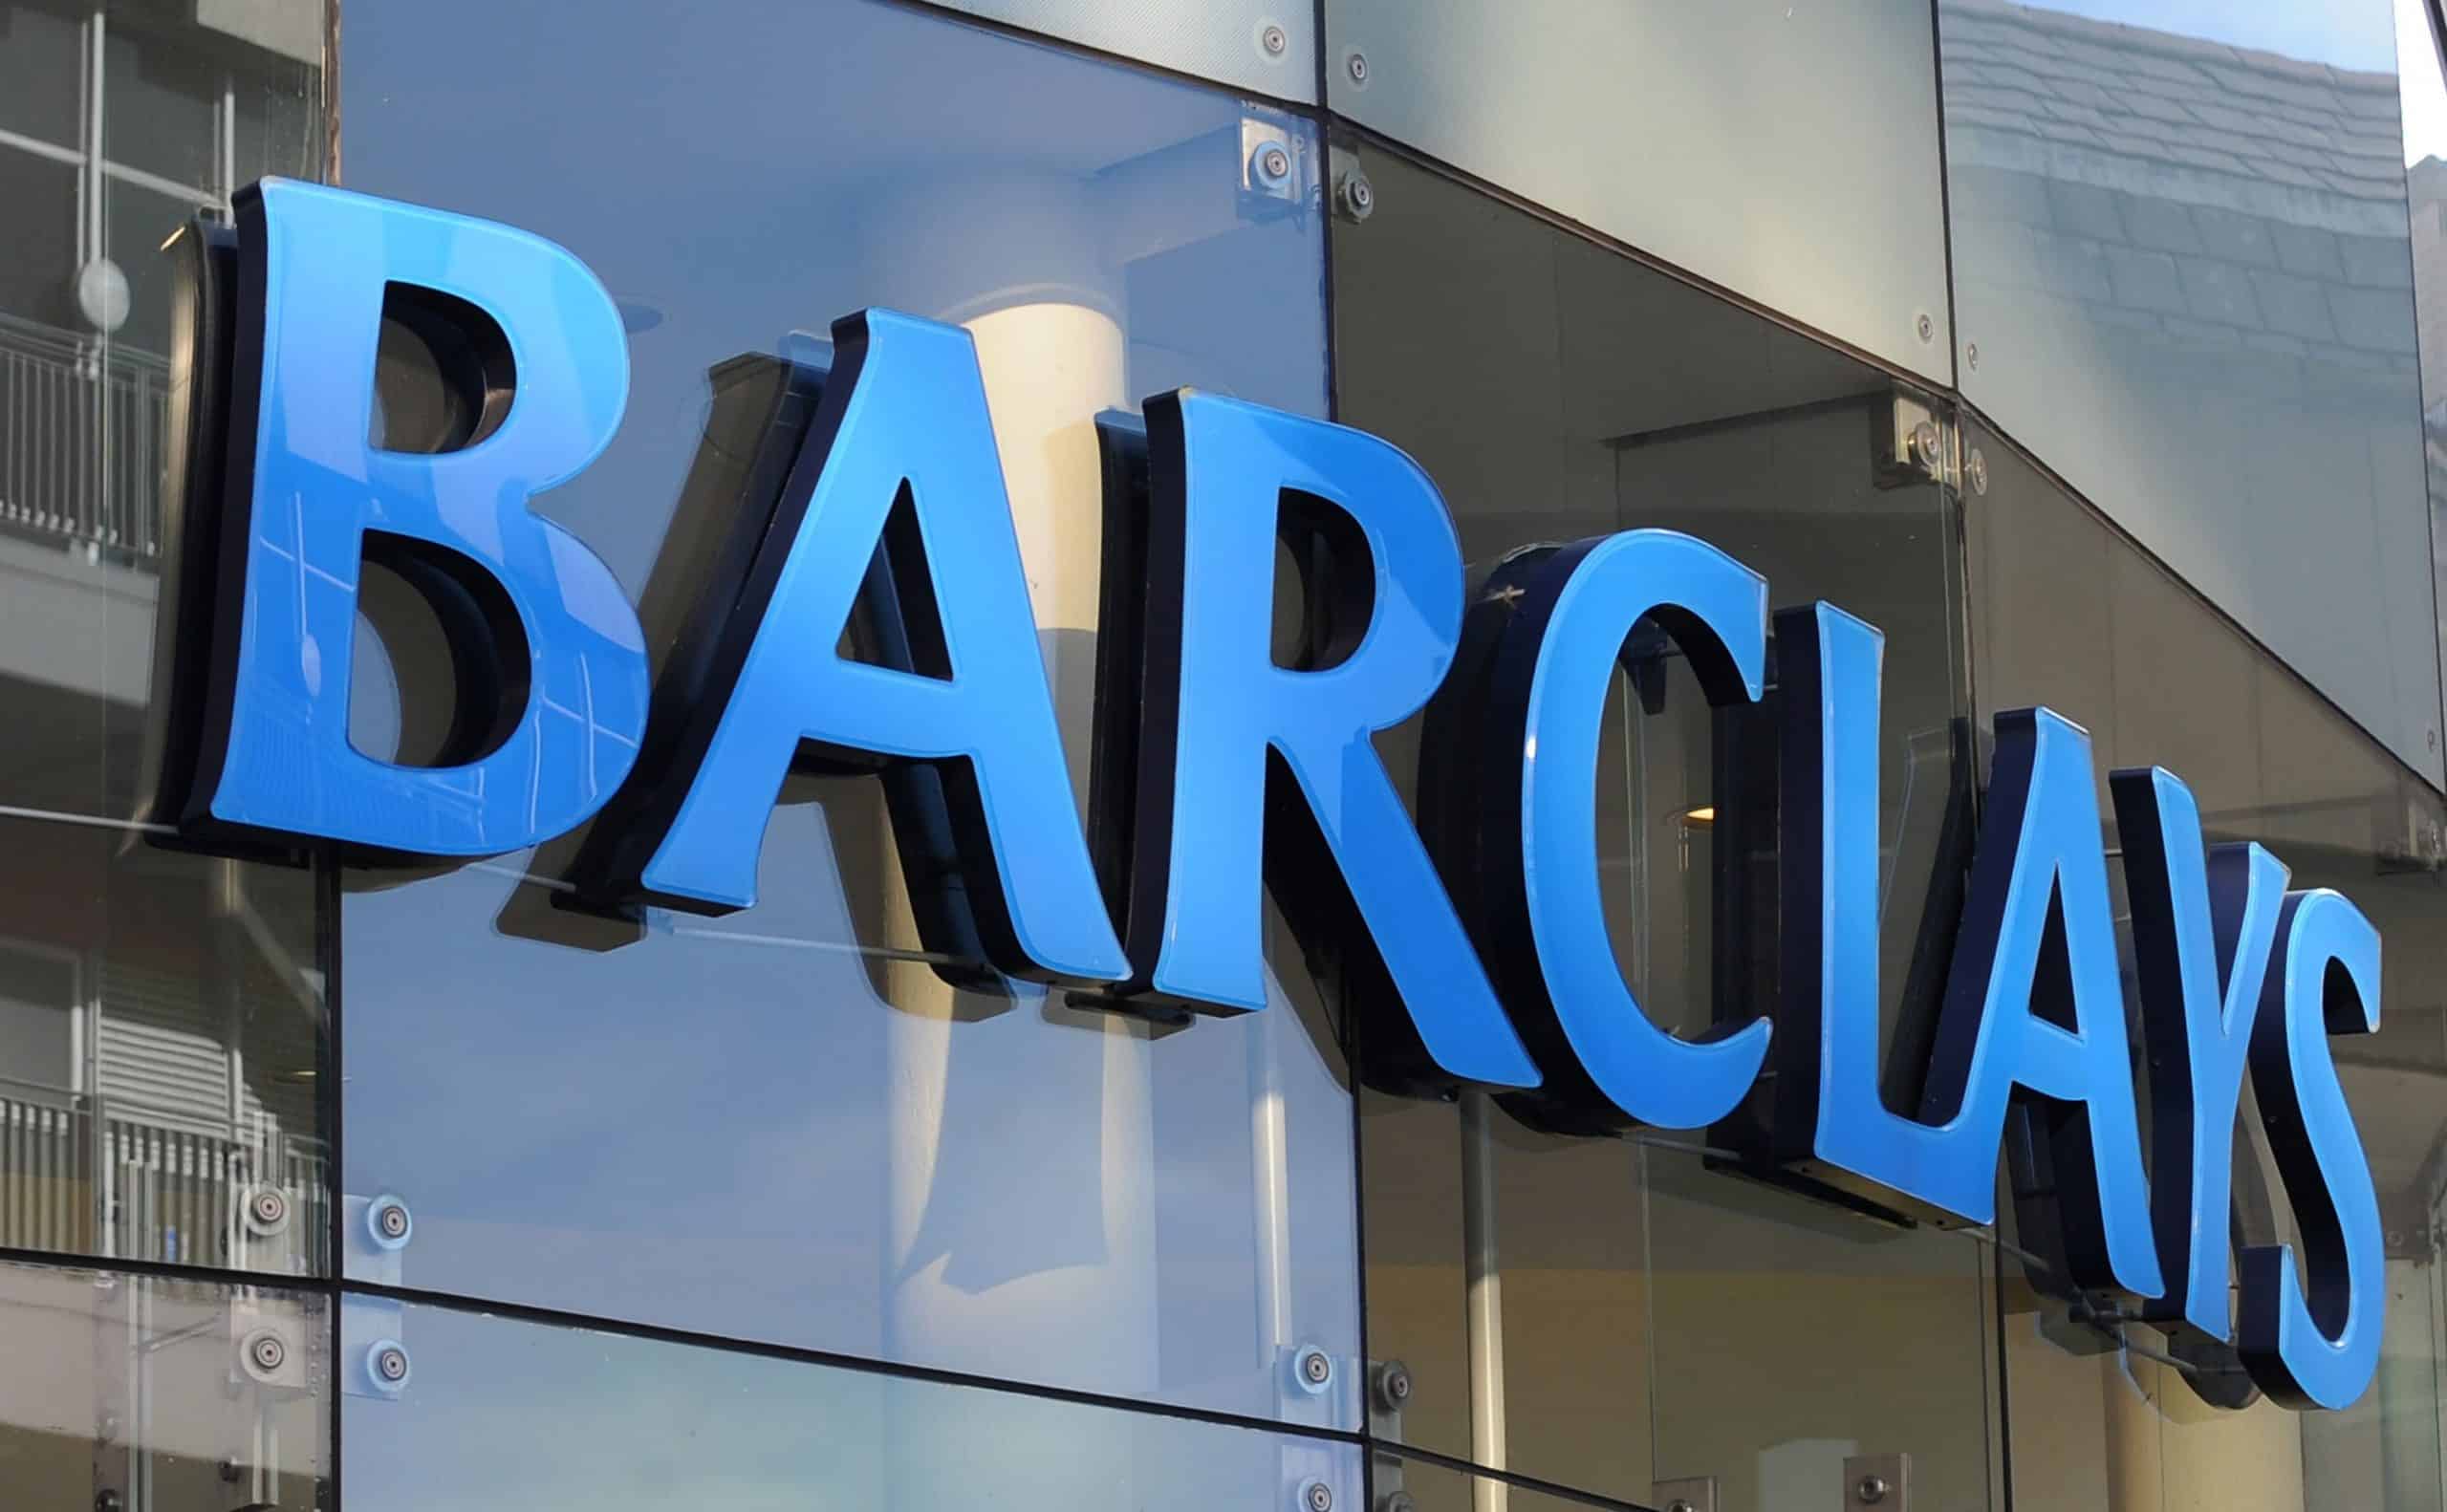 Three Barclays bankers cleared of fraud over £4 billion crisis deal with Qatar